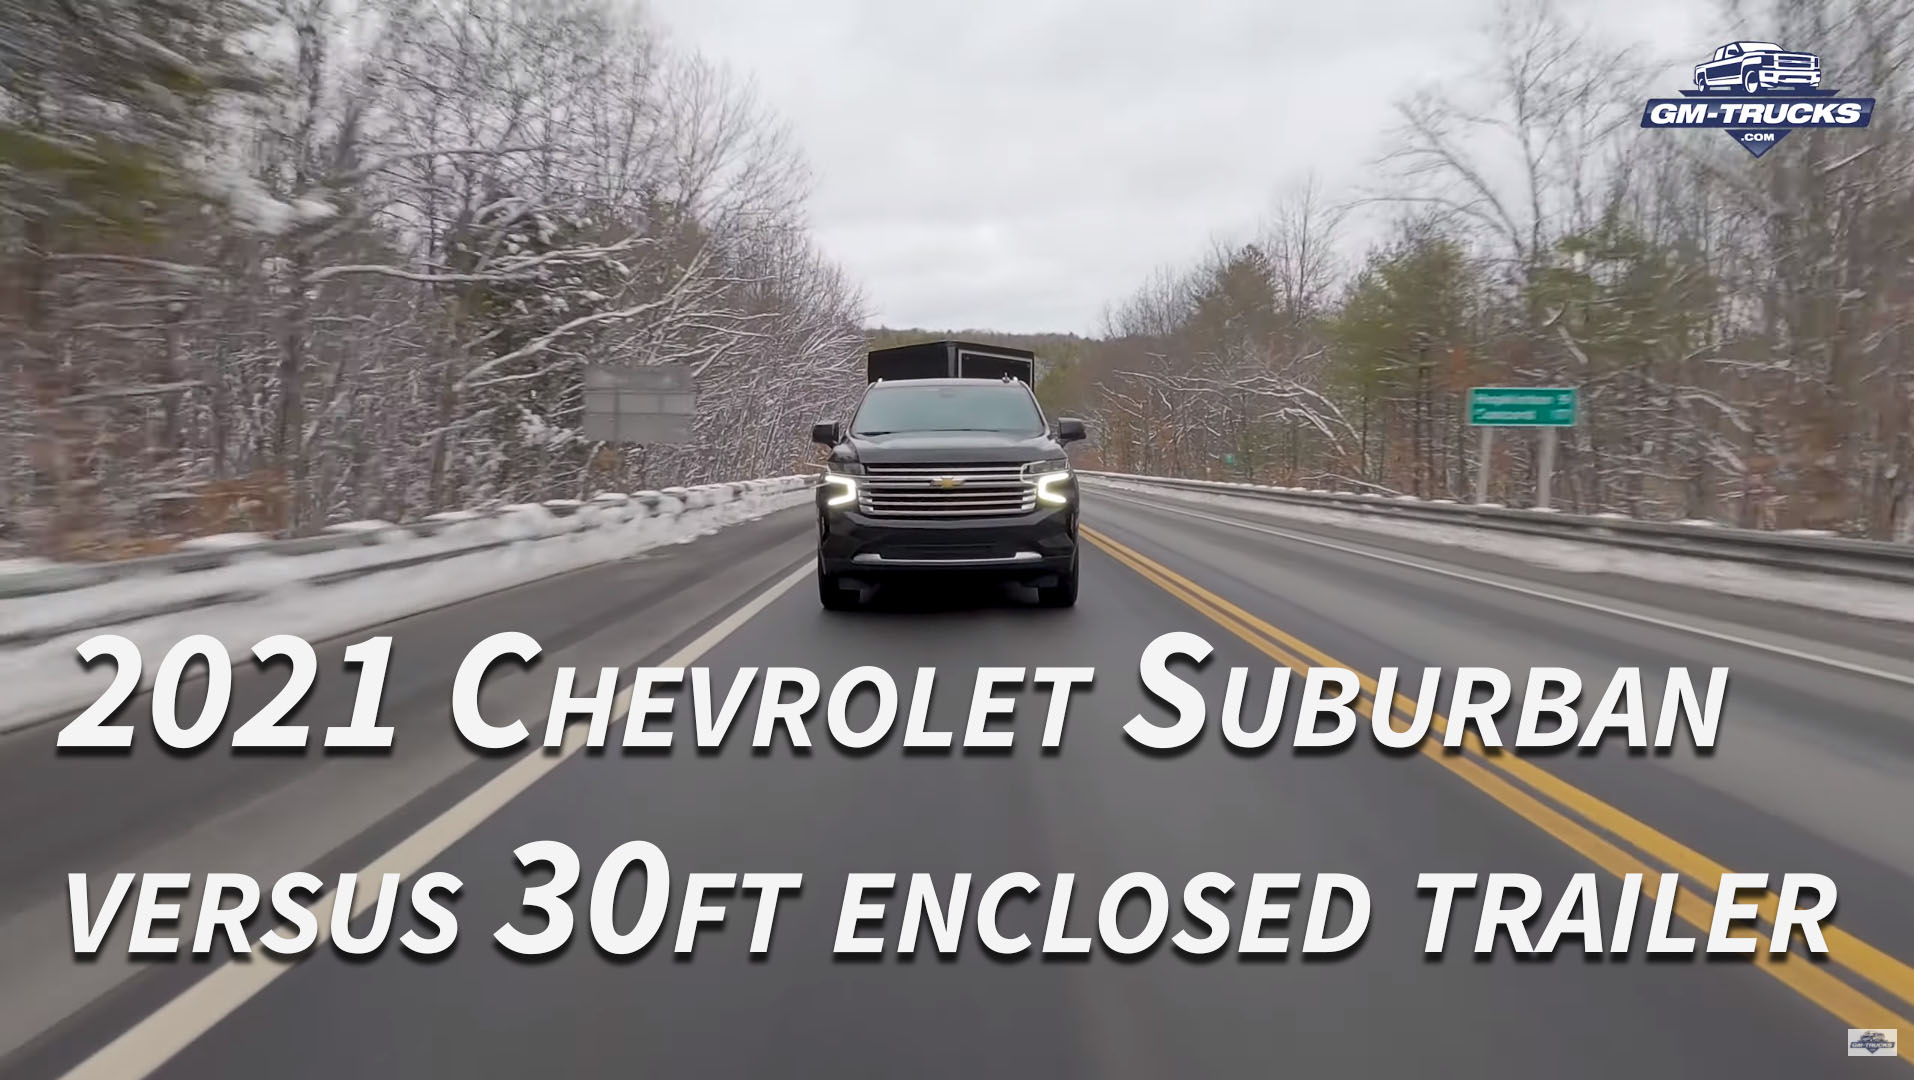 Can a 2021 Chevrolet Suburban Tow A 30-Foot Enclosed Trailer? We found out.